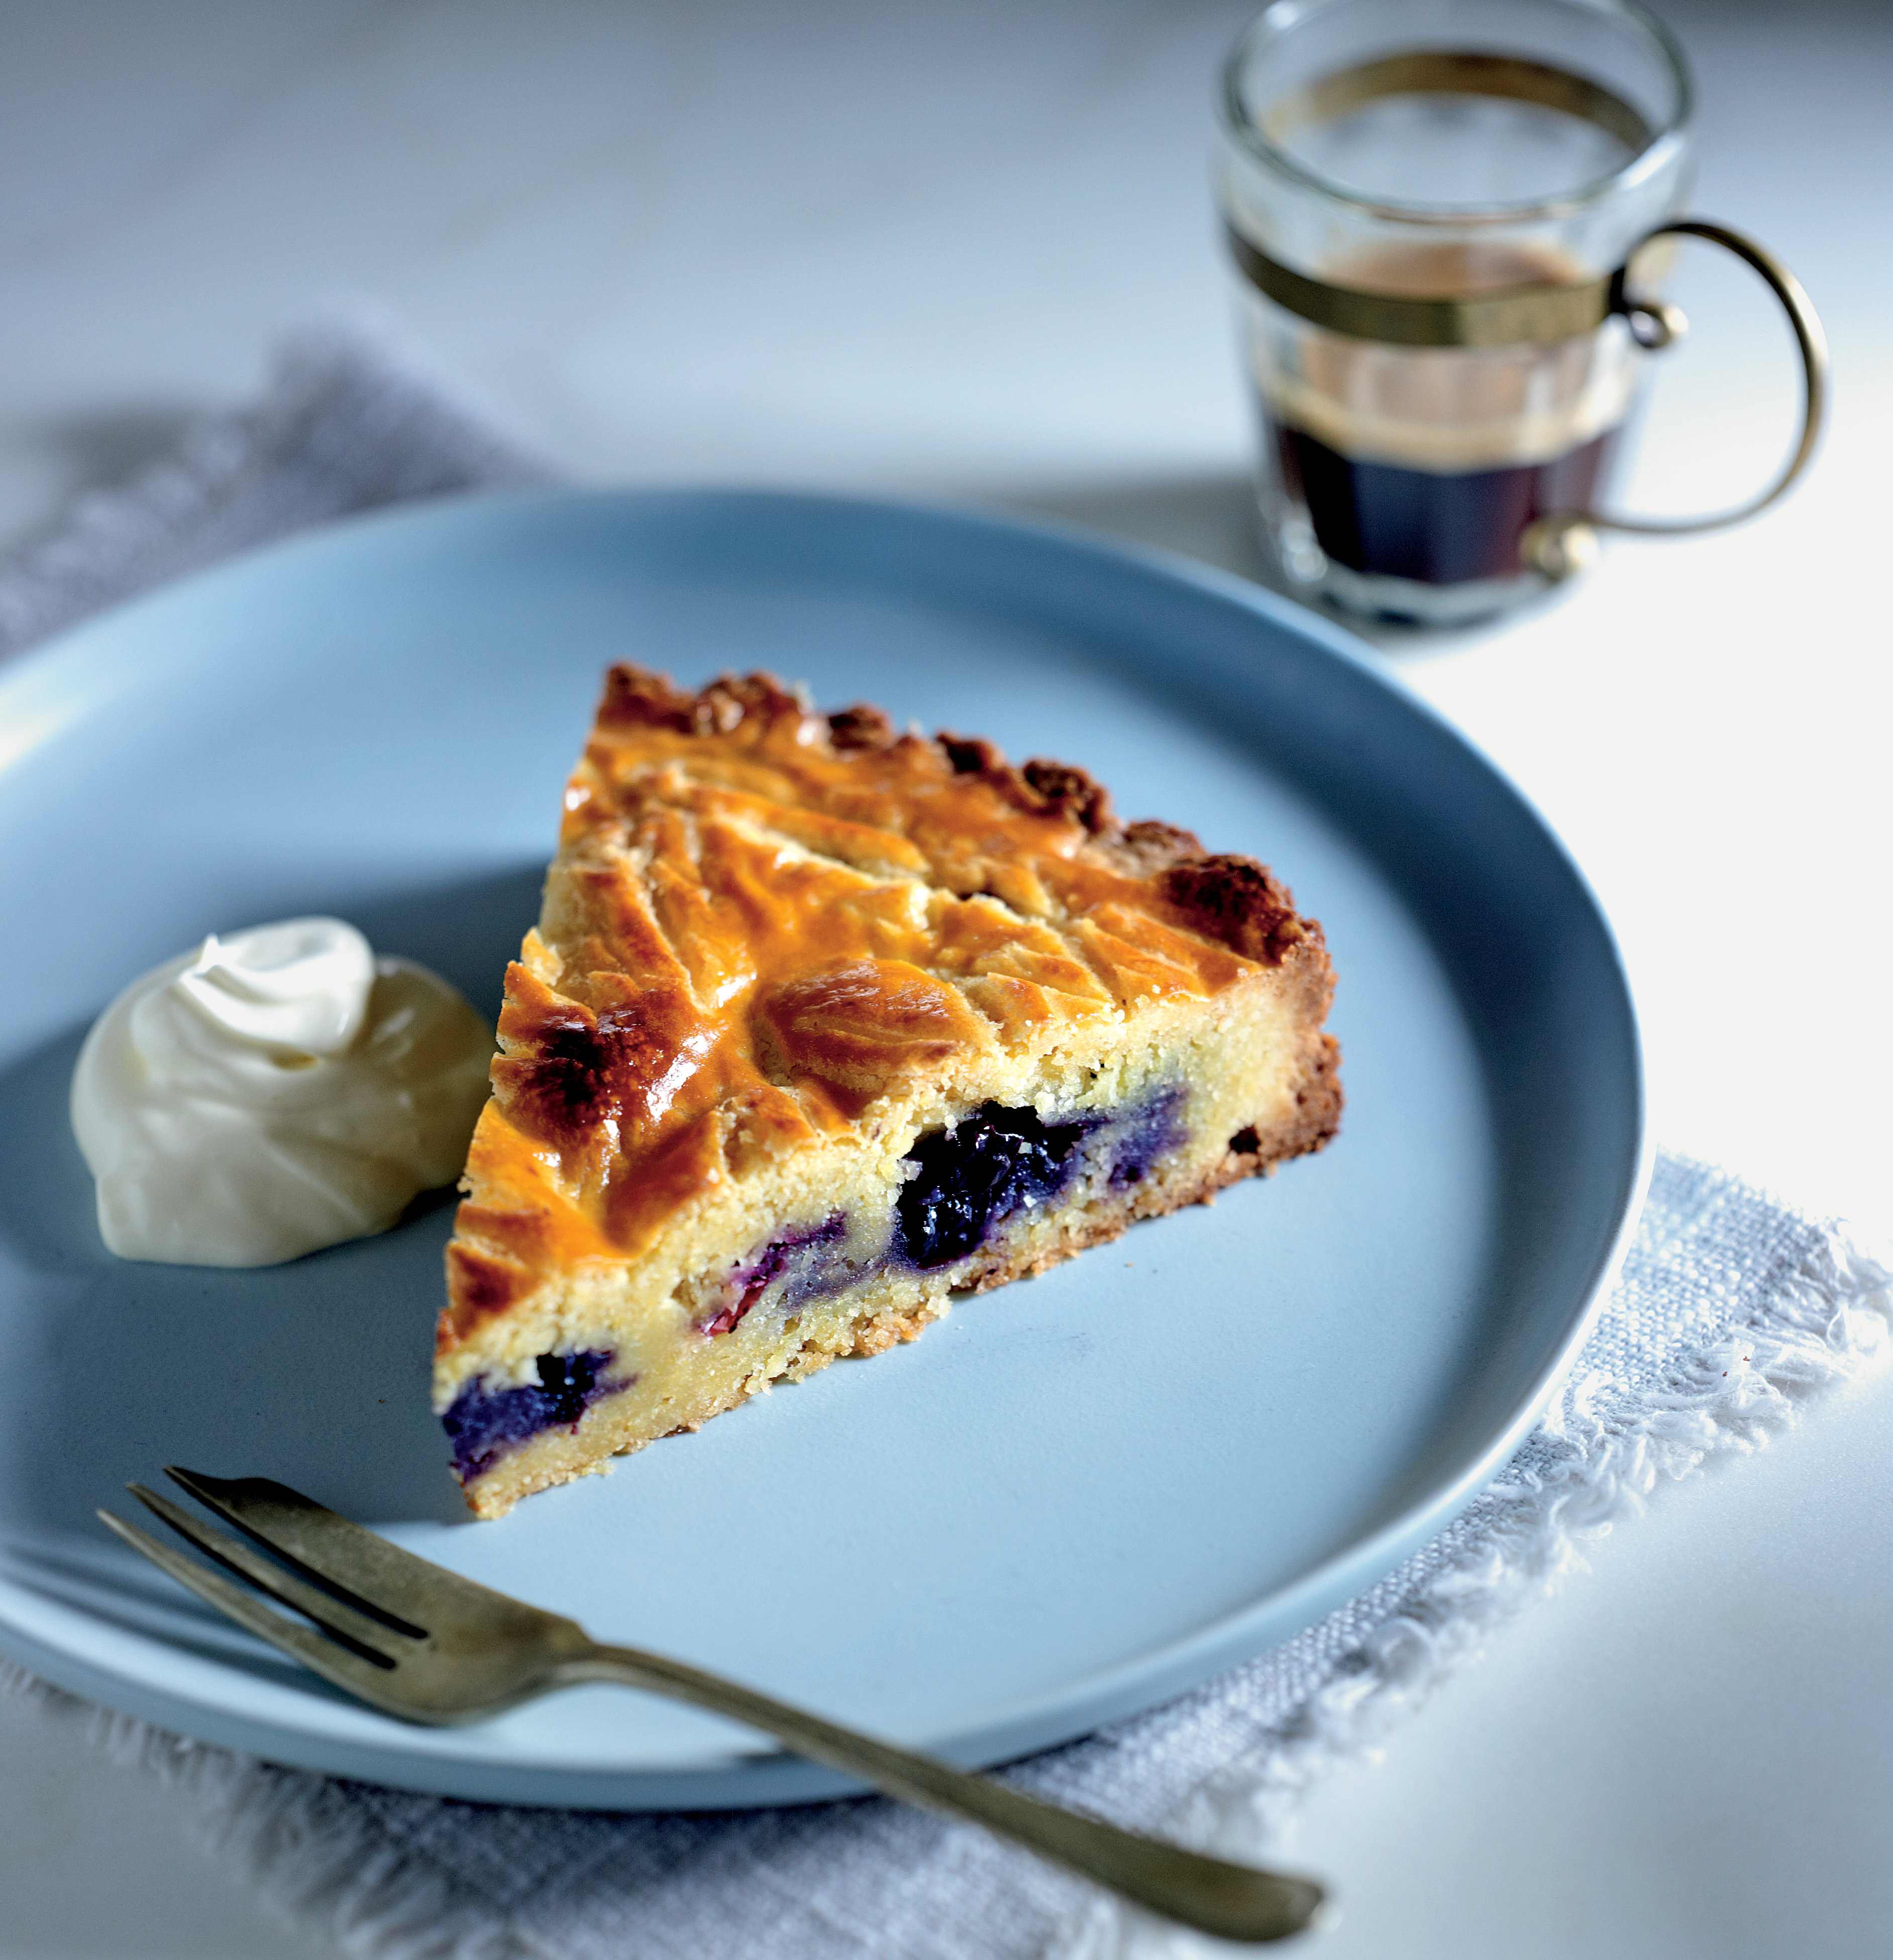 Almond and blueberry galette